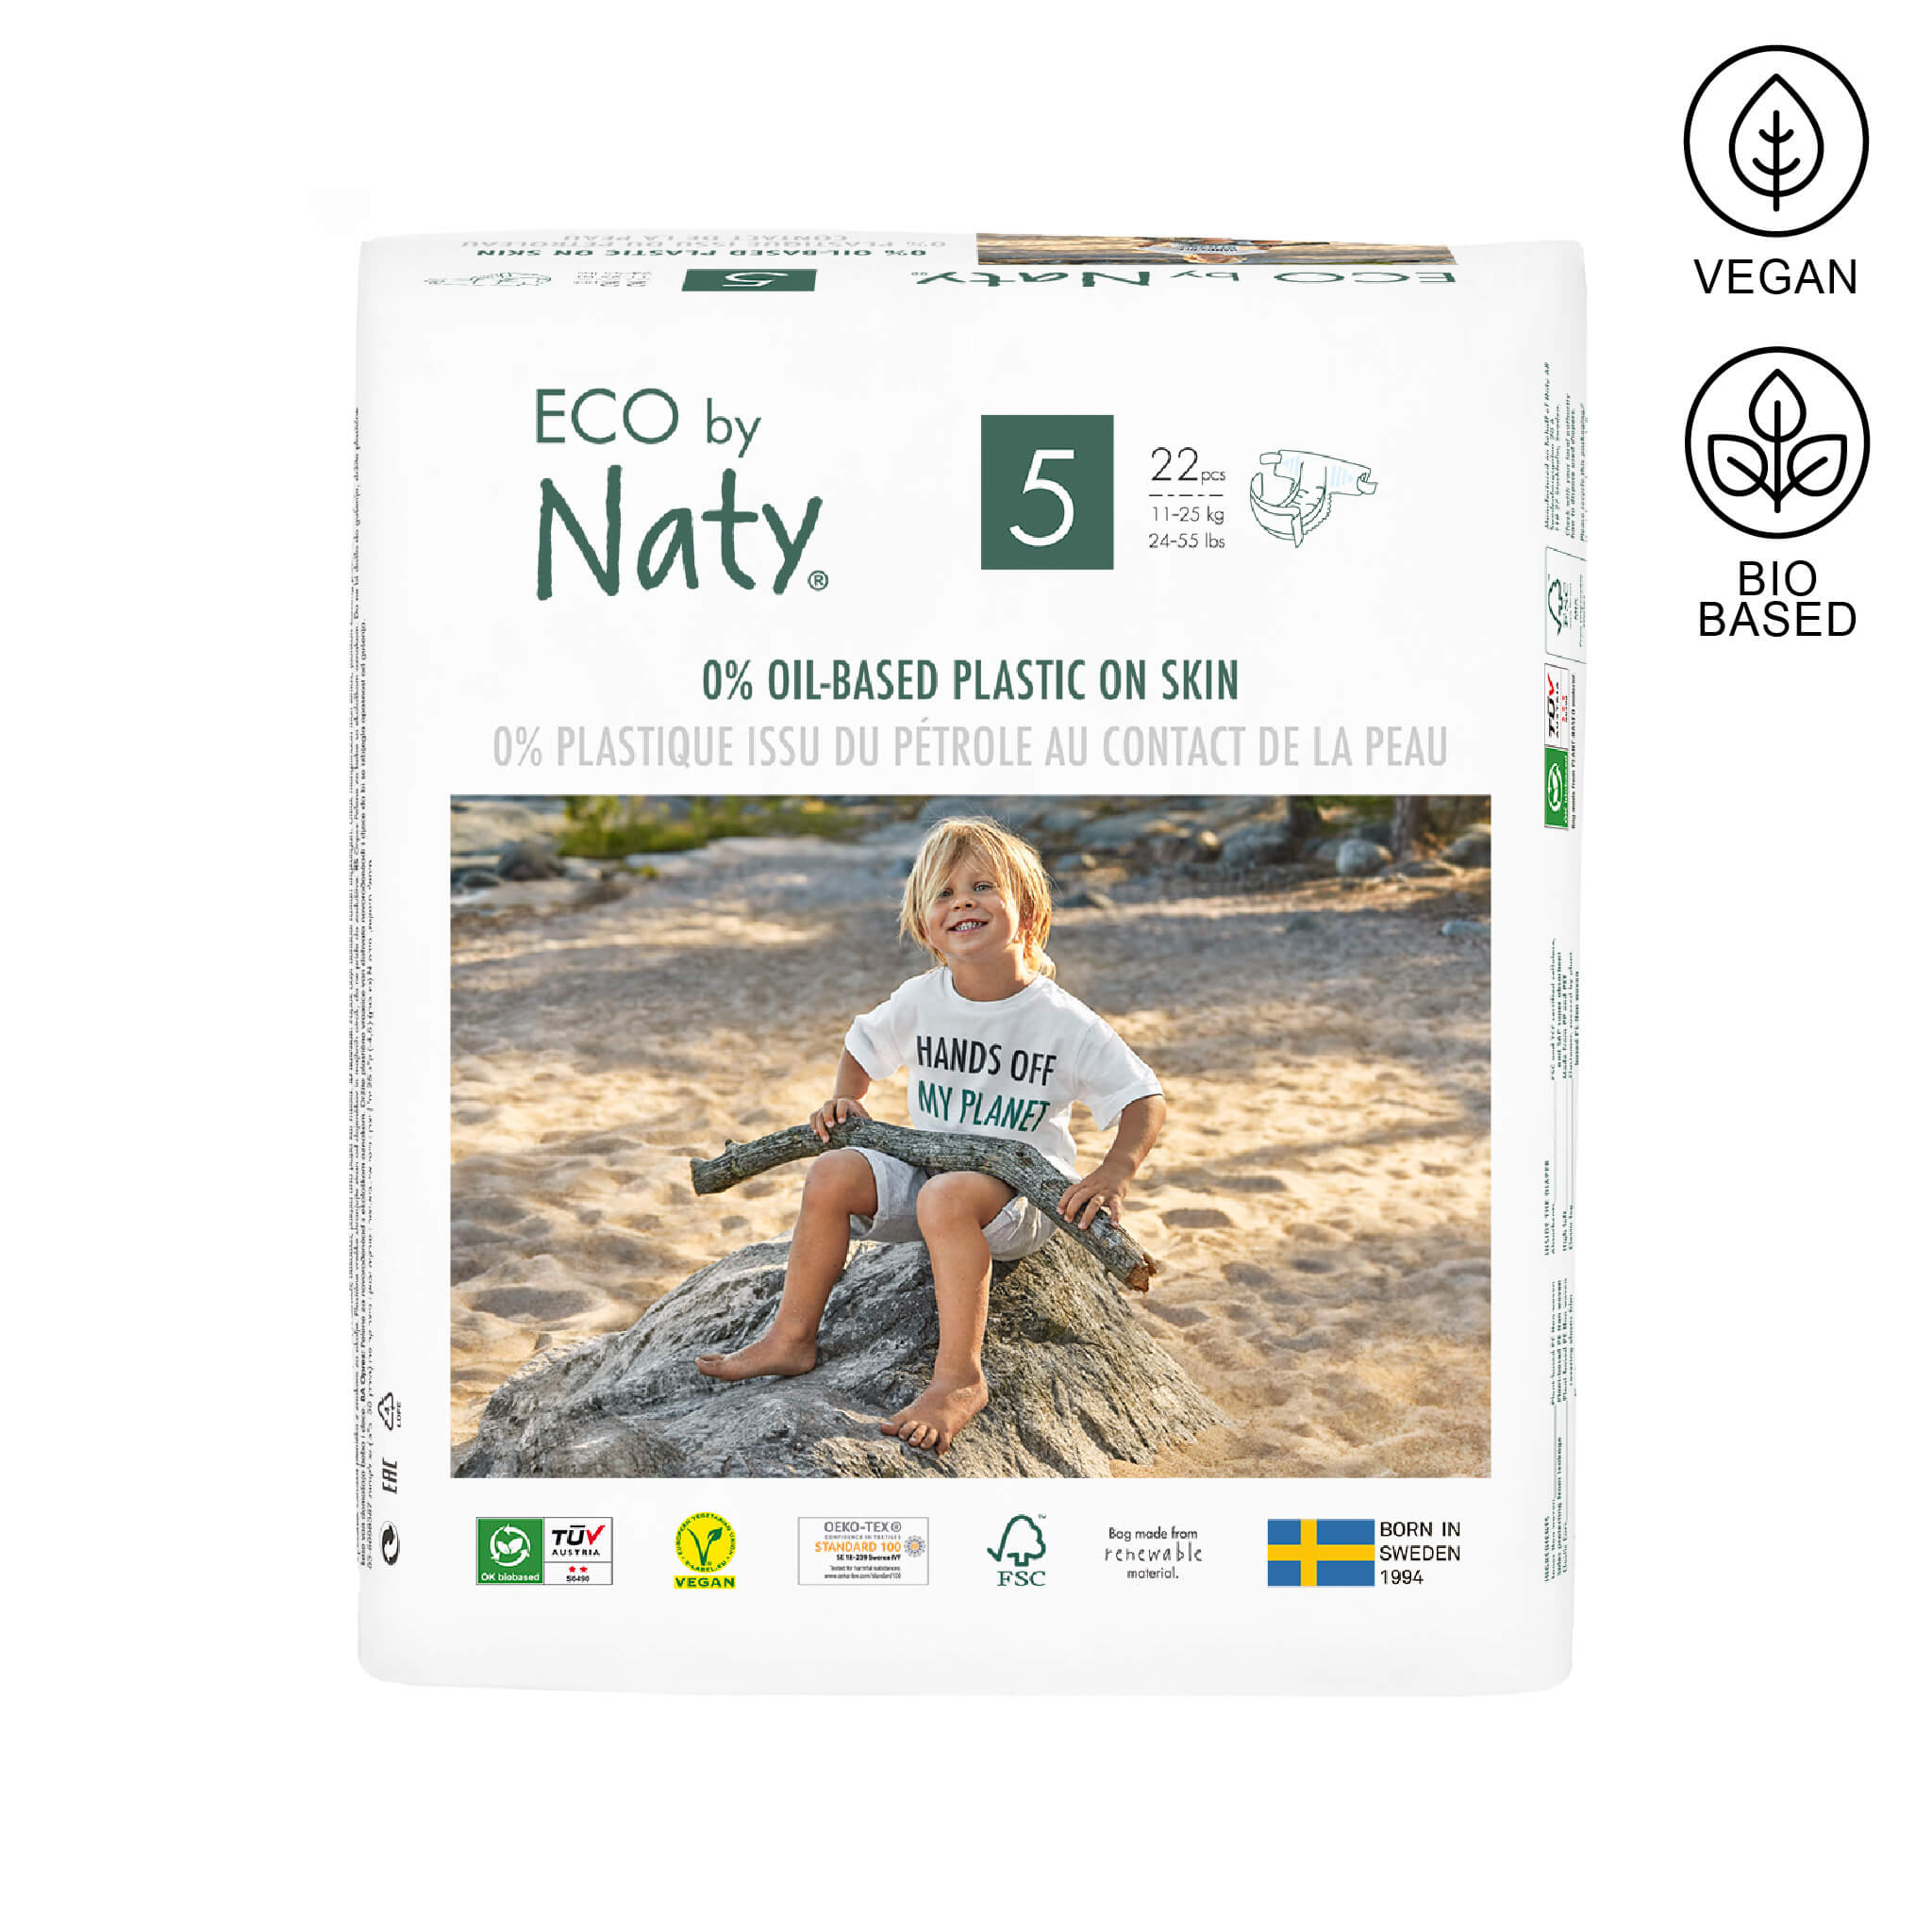 Eco by Naty Size 5 diapers package of 22 units.